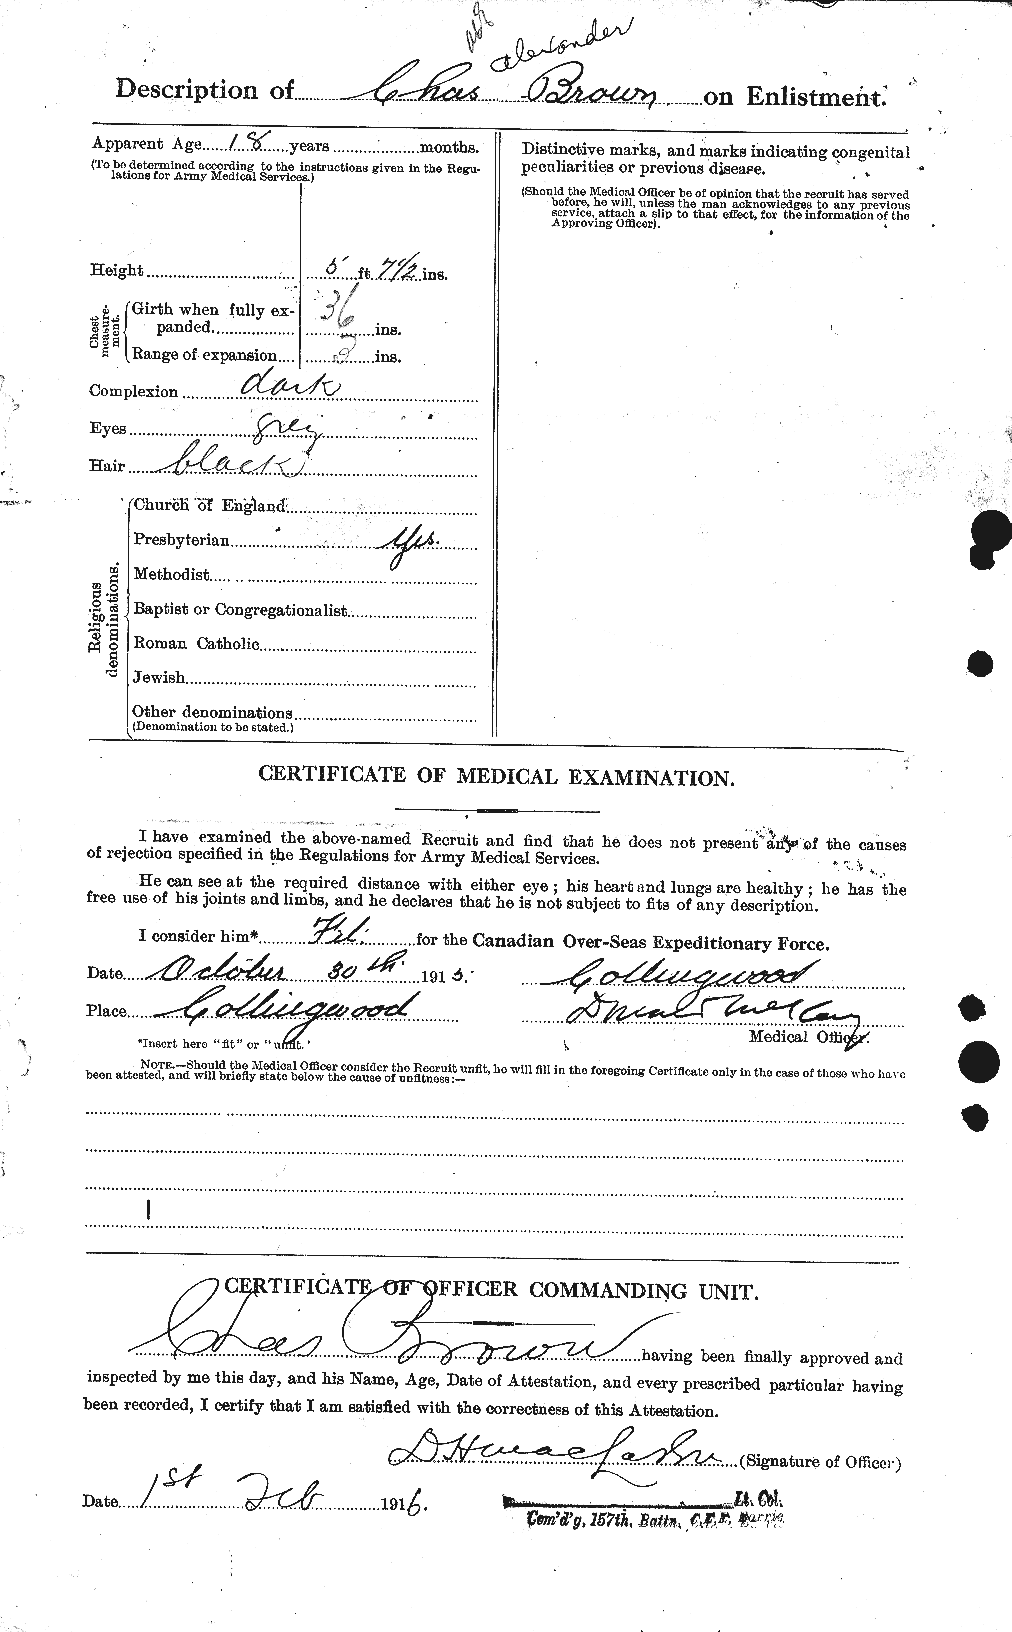 Personnel Records of the First World War - CEF 264382b